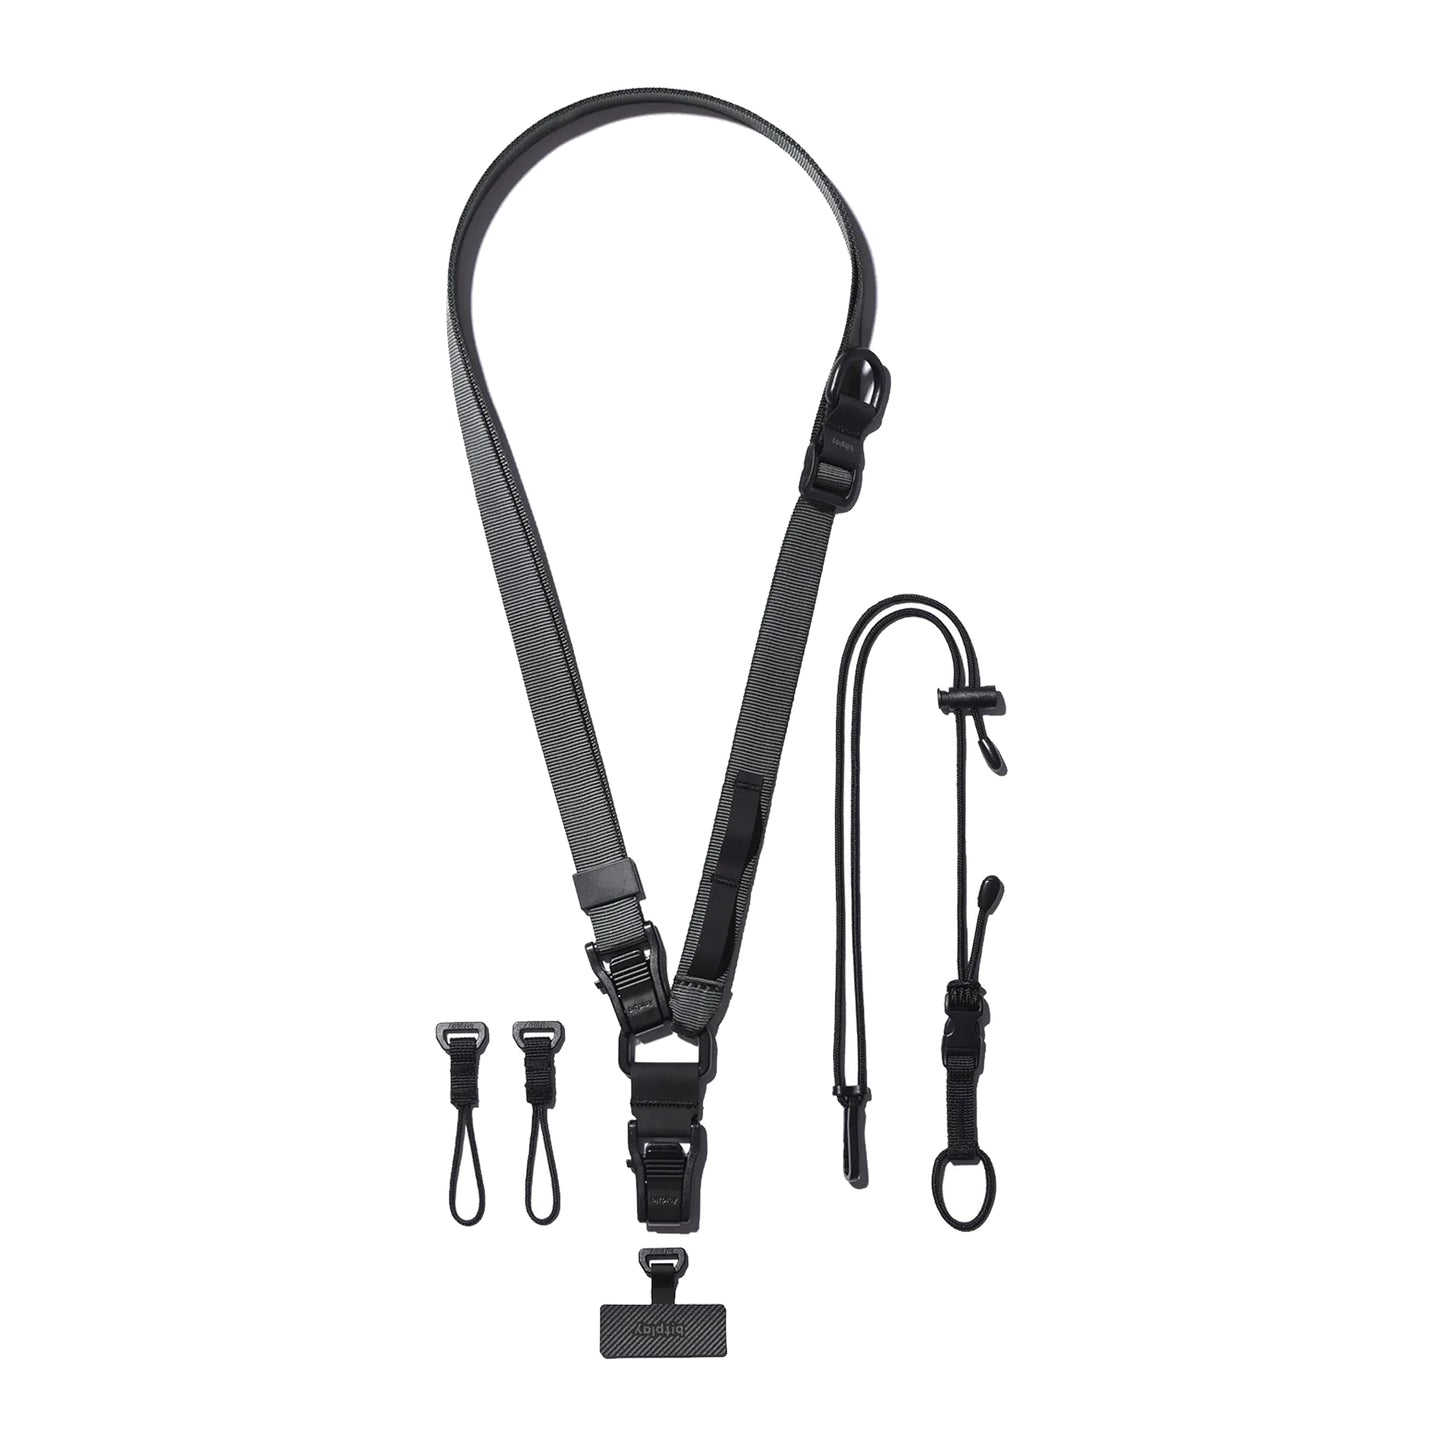 Bitplay Multi-Use Adventure Strap Lanyard - Camera Strap Connector and Strap Adapter included